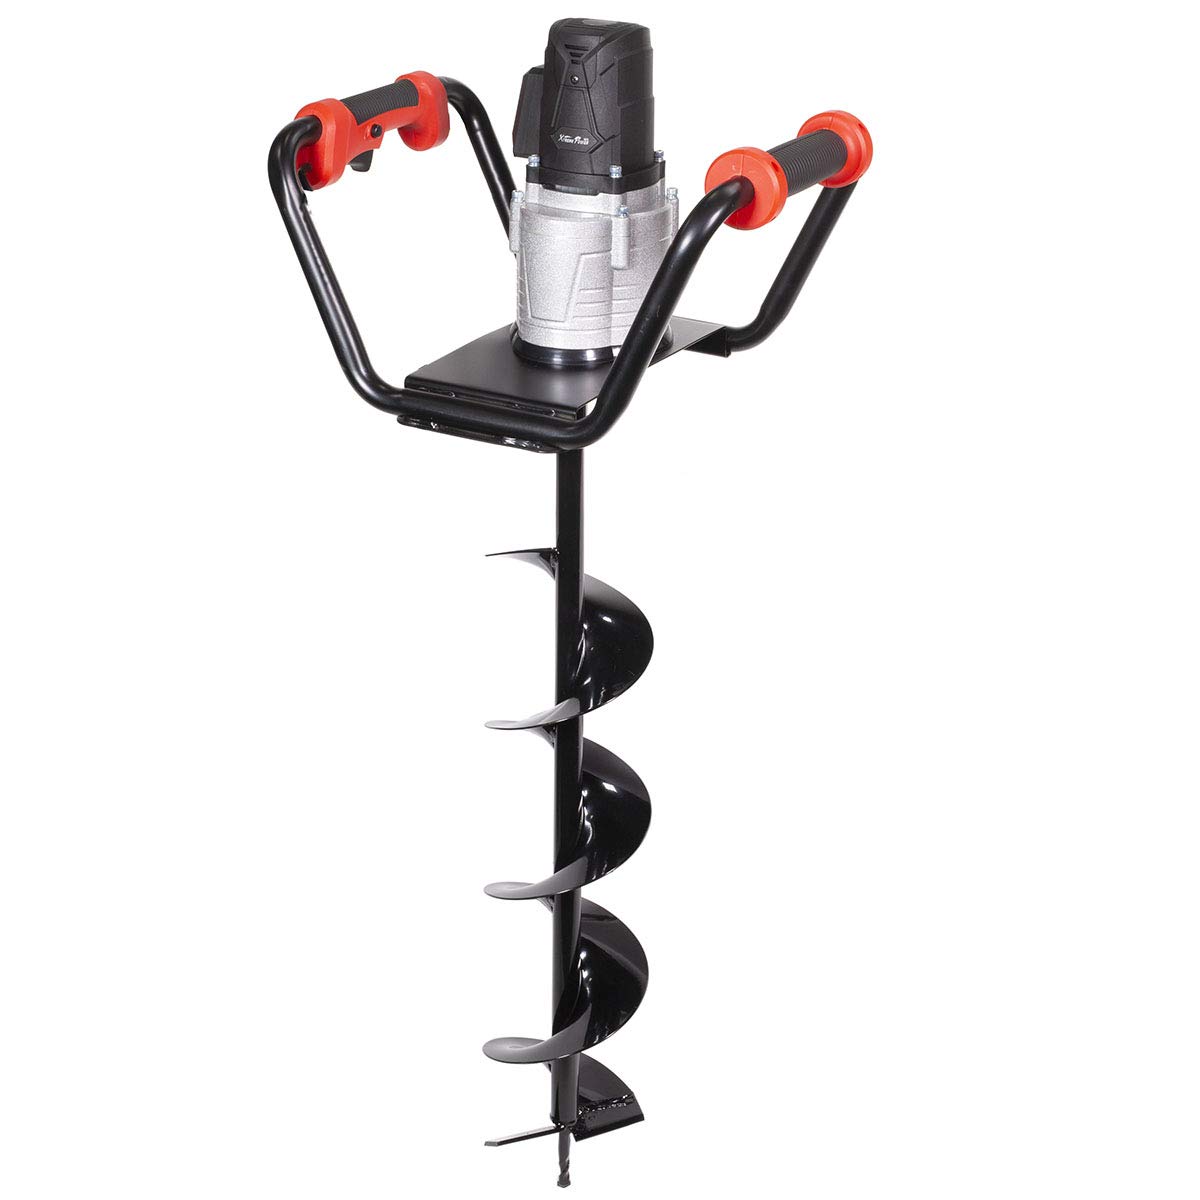 XtremepowerUS 1500W Post Hole Digger Earth Auger Hole Digger Electric Auger Digging Tools Auger with 6" Digging Auger Bit Set